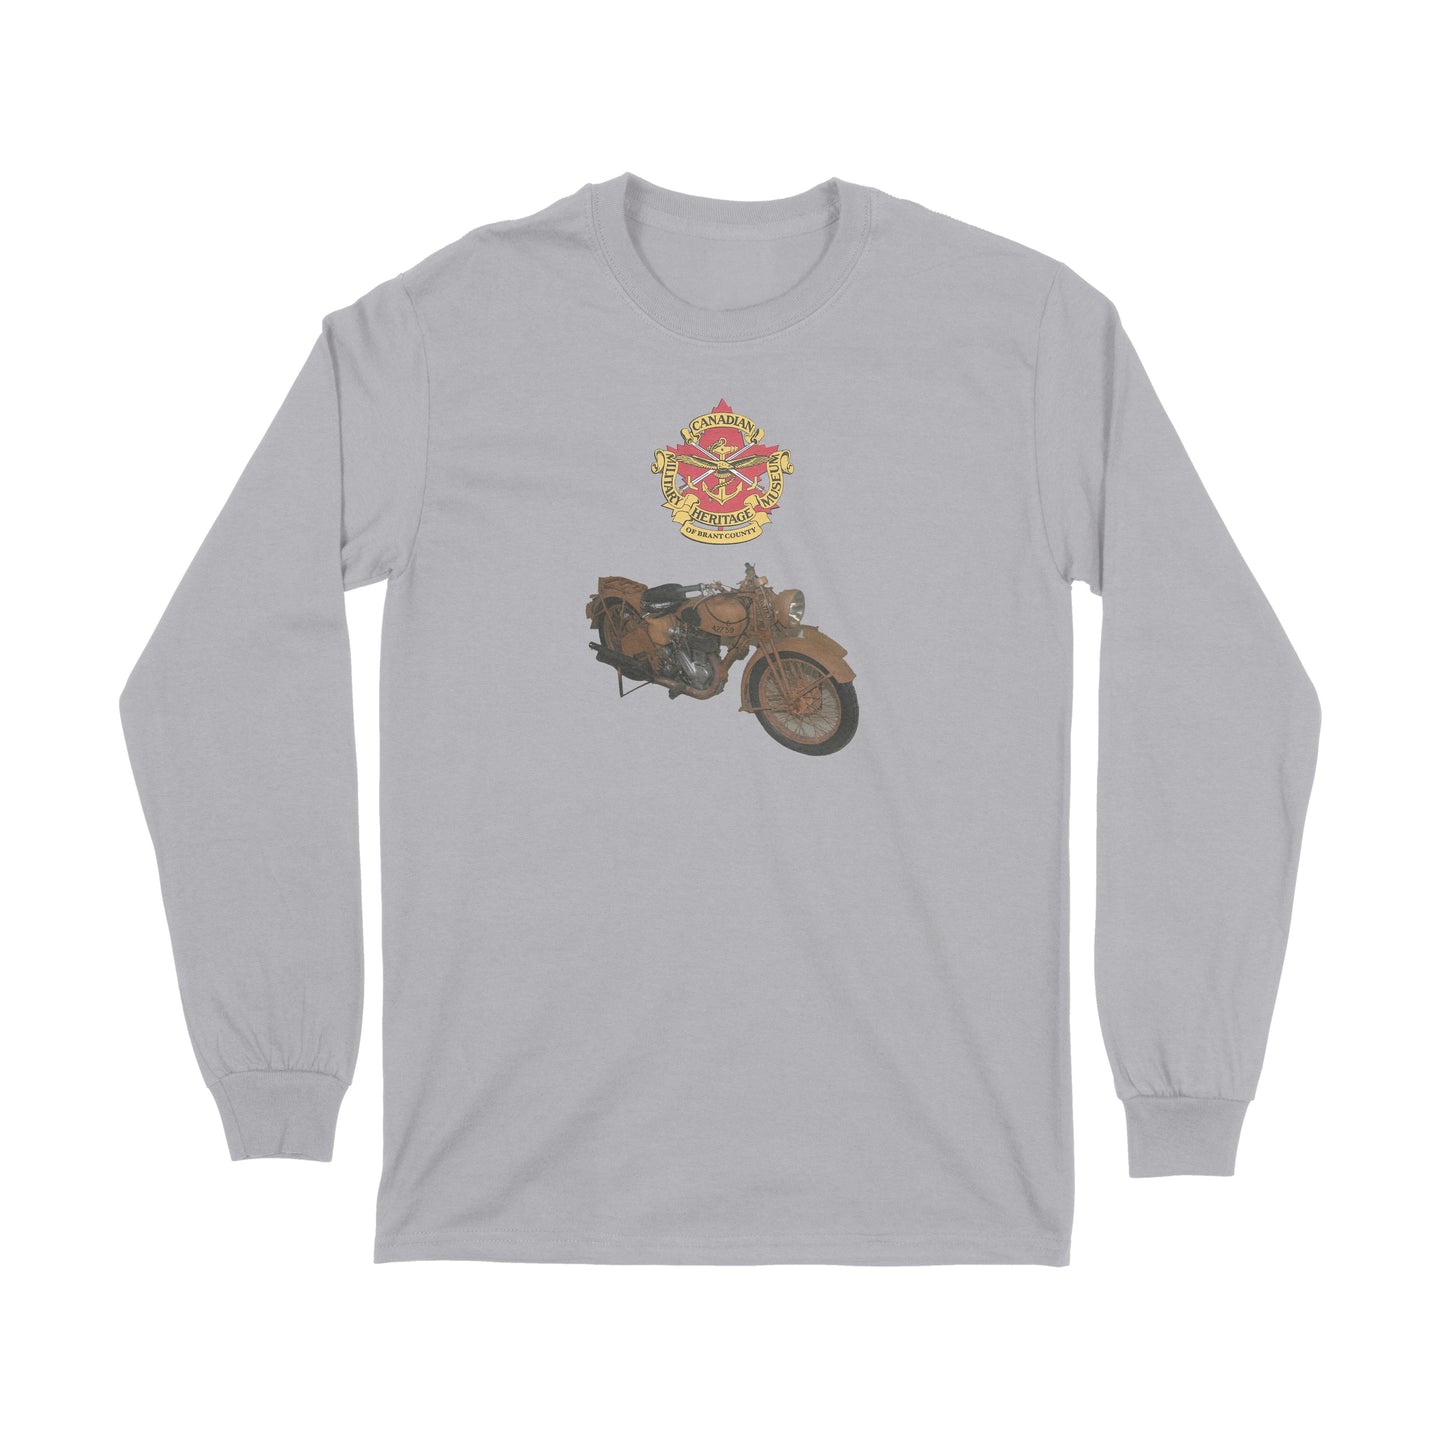 Brantford, Canadian Military Heritage Museum, Fat Dave, Long Sleeve, Museum, Norton, Grey